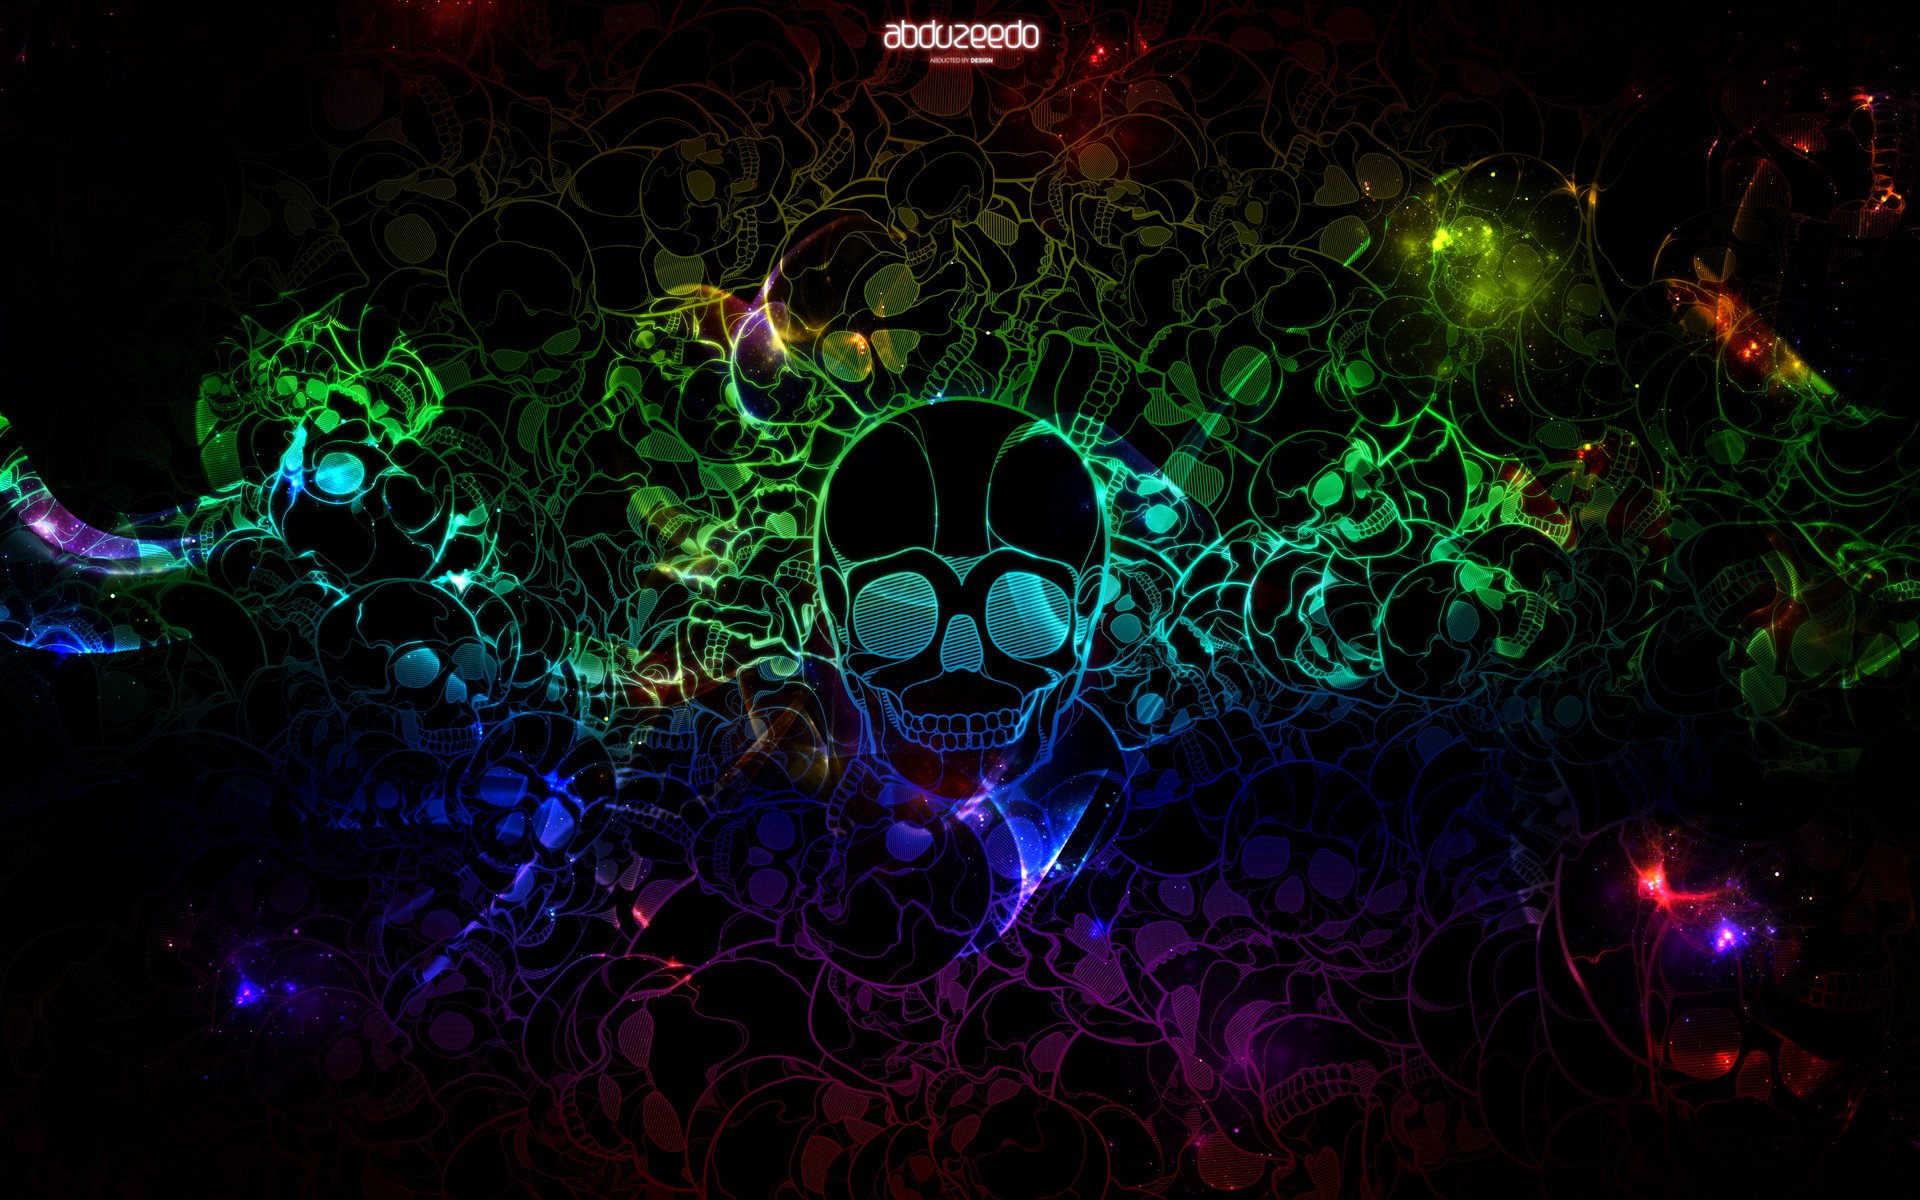 Skull Wallpaper Photos Download The BEST Free Skull Wallpaper Stock Photos   HD Images